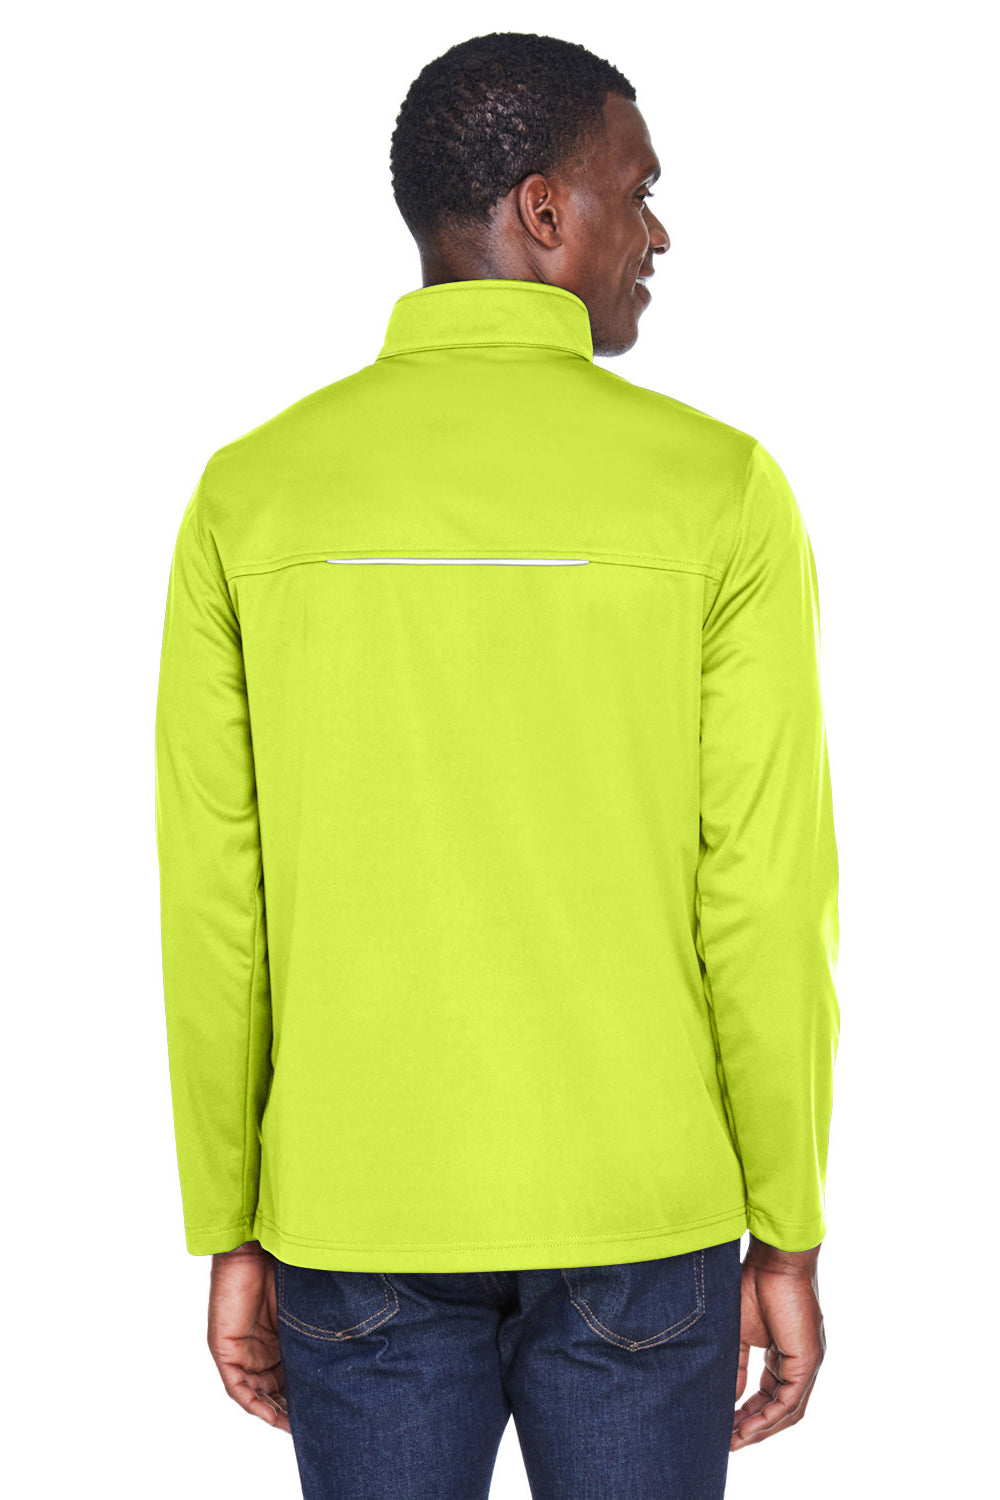 Core 365 CE708 Mens Techno Lite Water Resistant Full Zip Jacket Safety Yellow Back